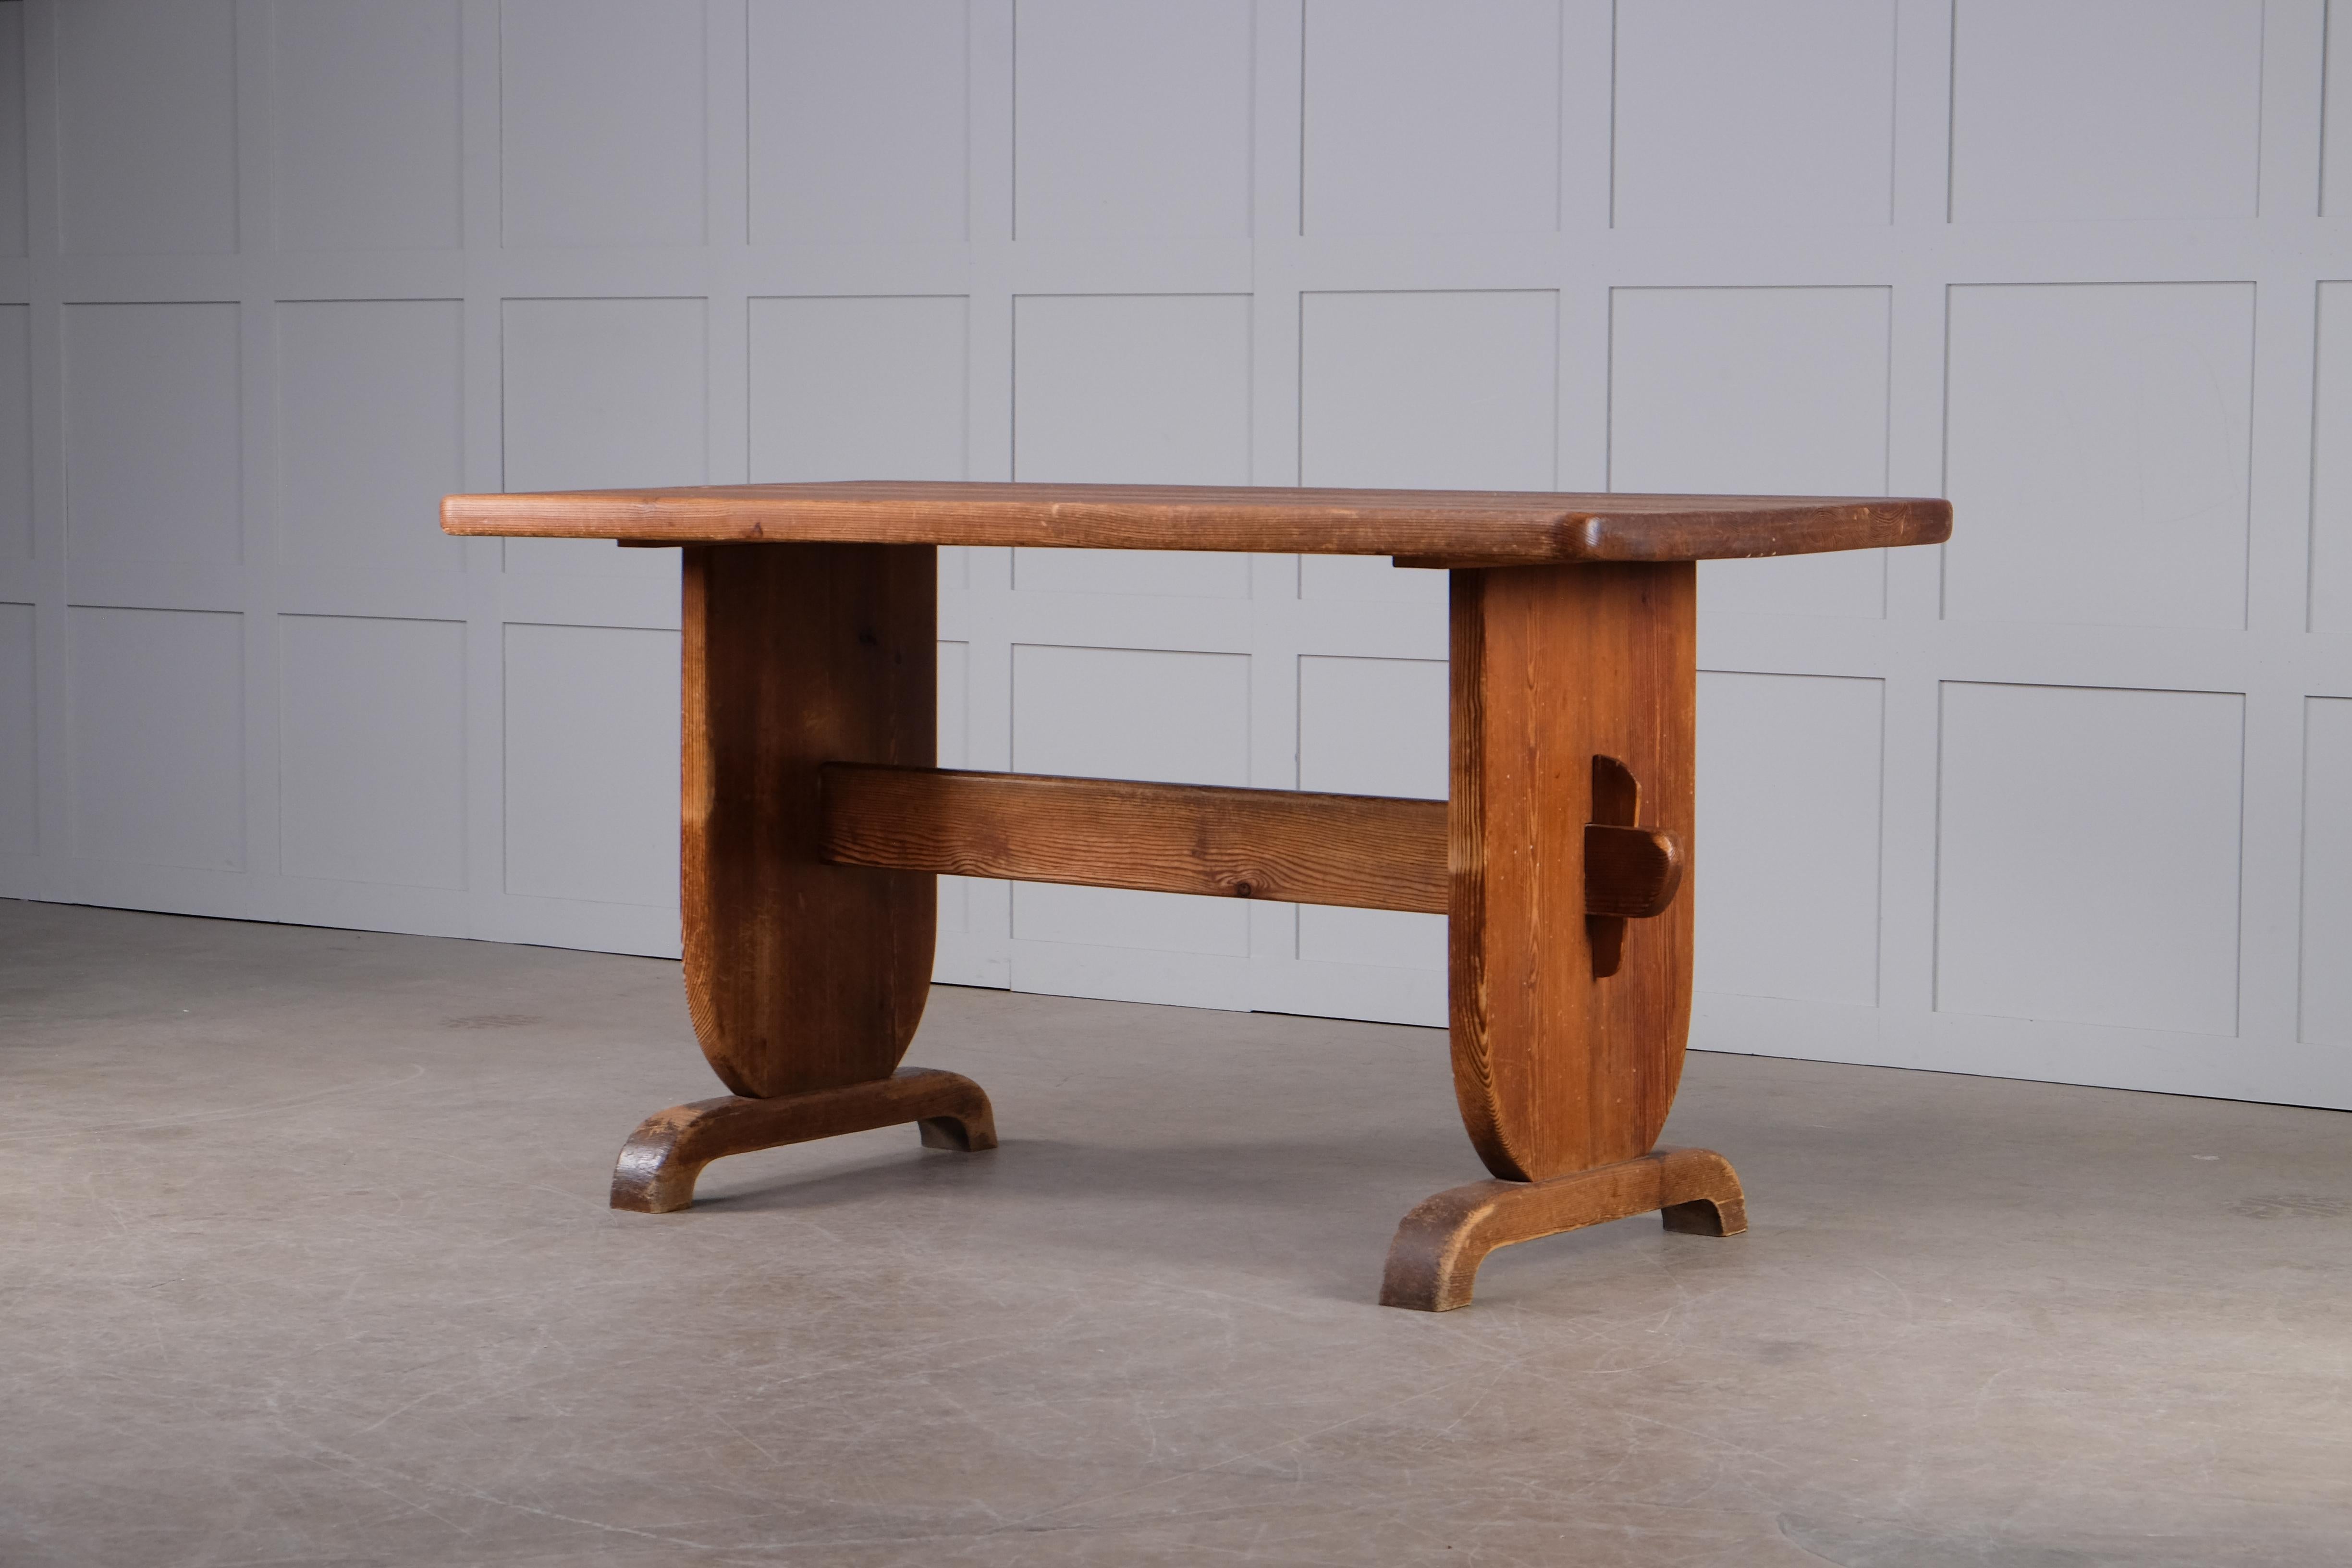 Dining table by Bo Fjaestad, Sweden, 1930s.
Original condition.
 